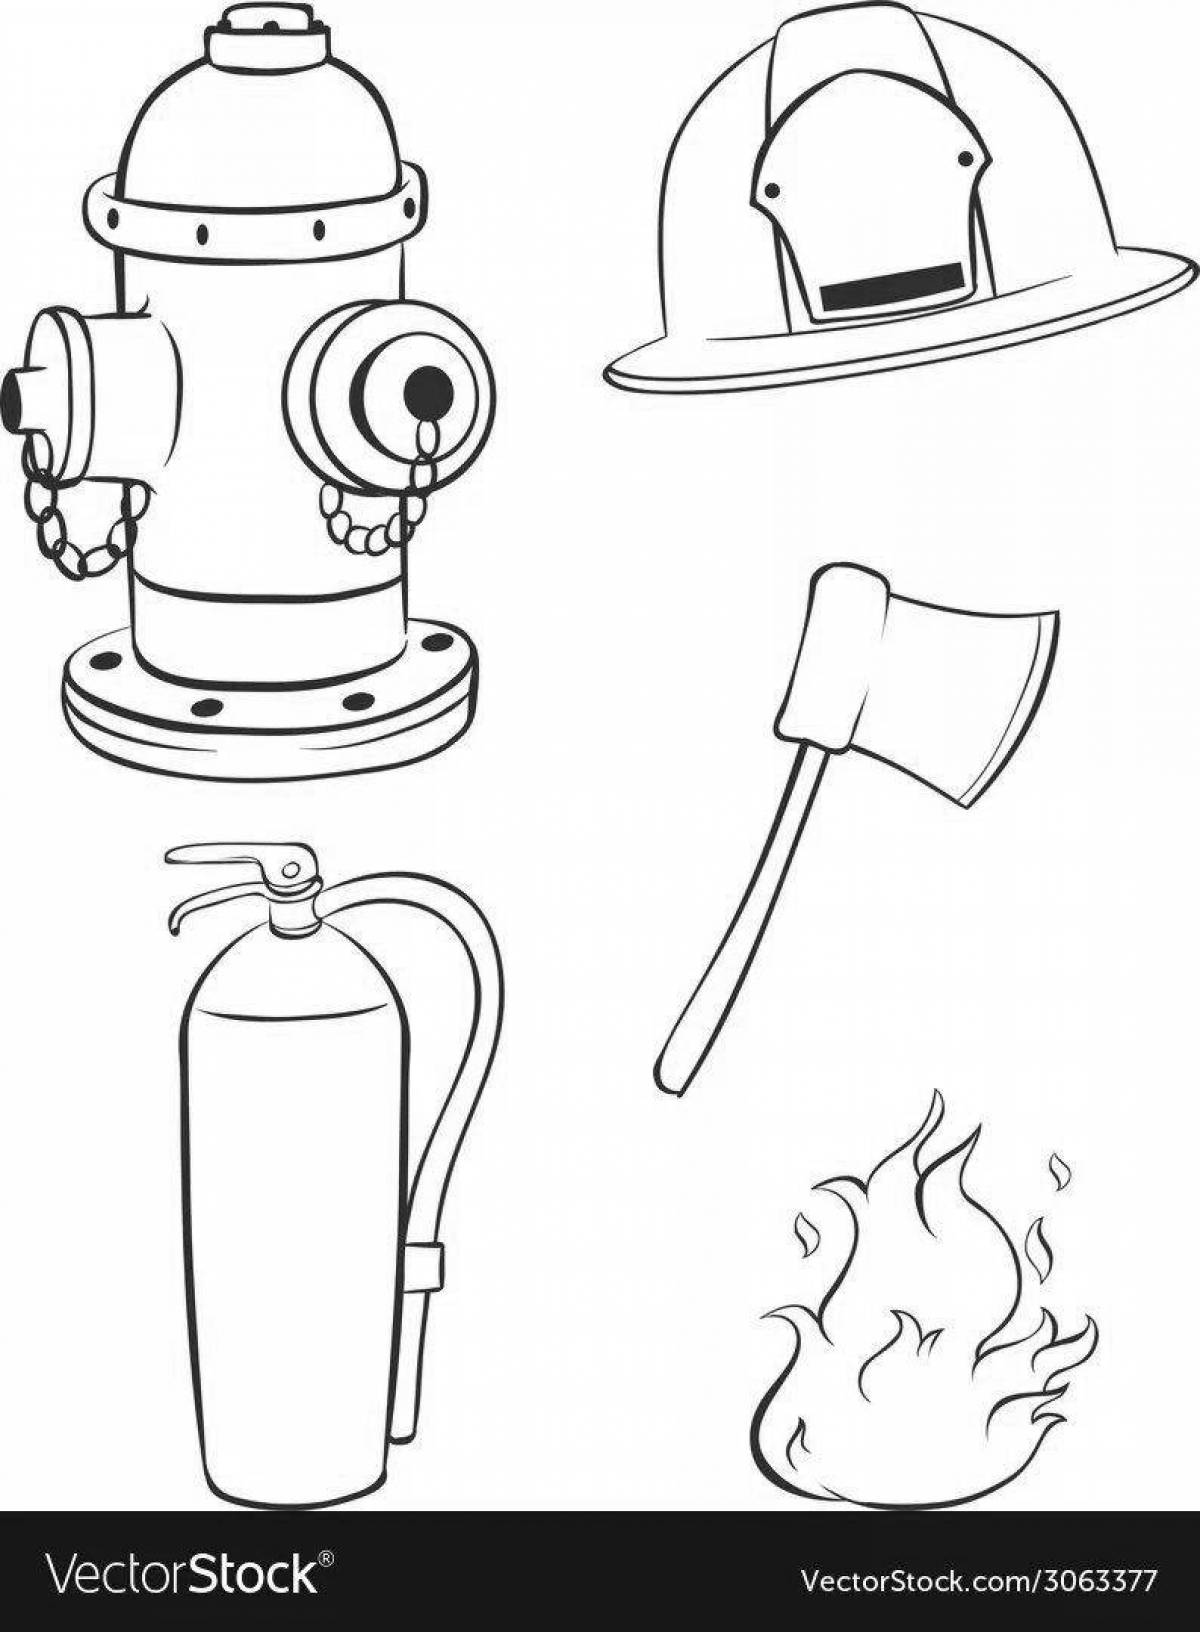 Attractive fire shield coloring page for kids